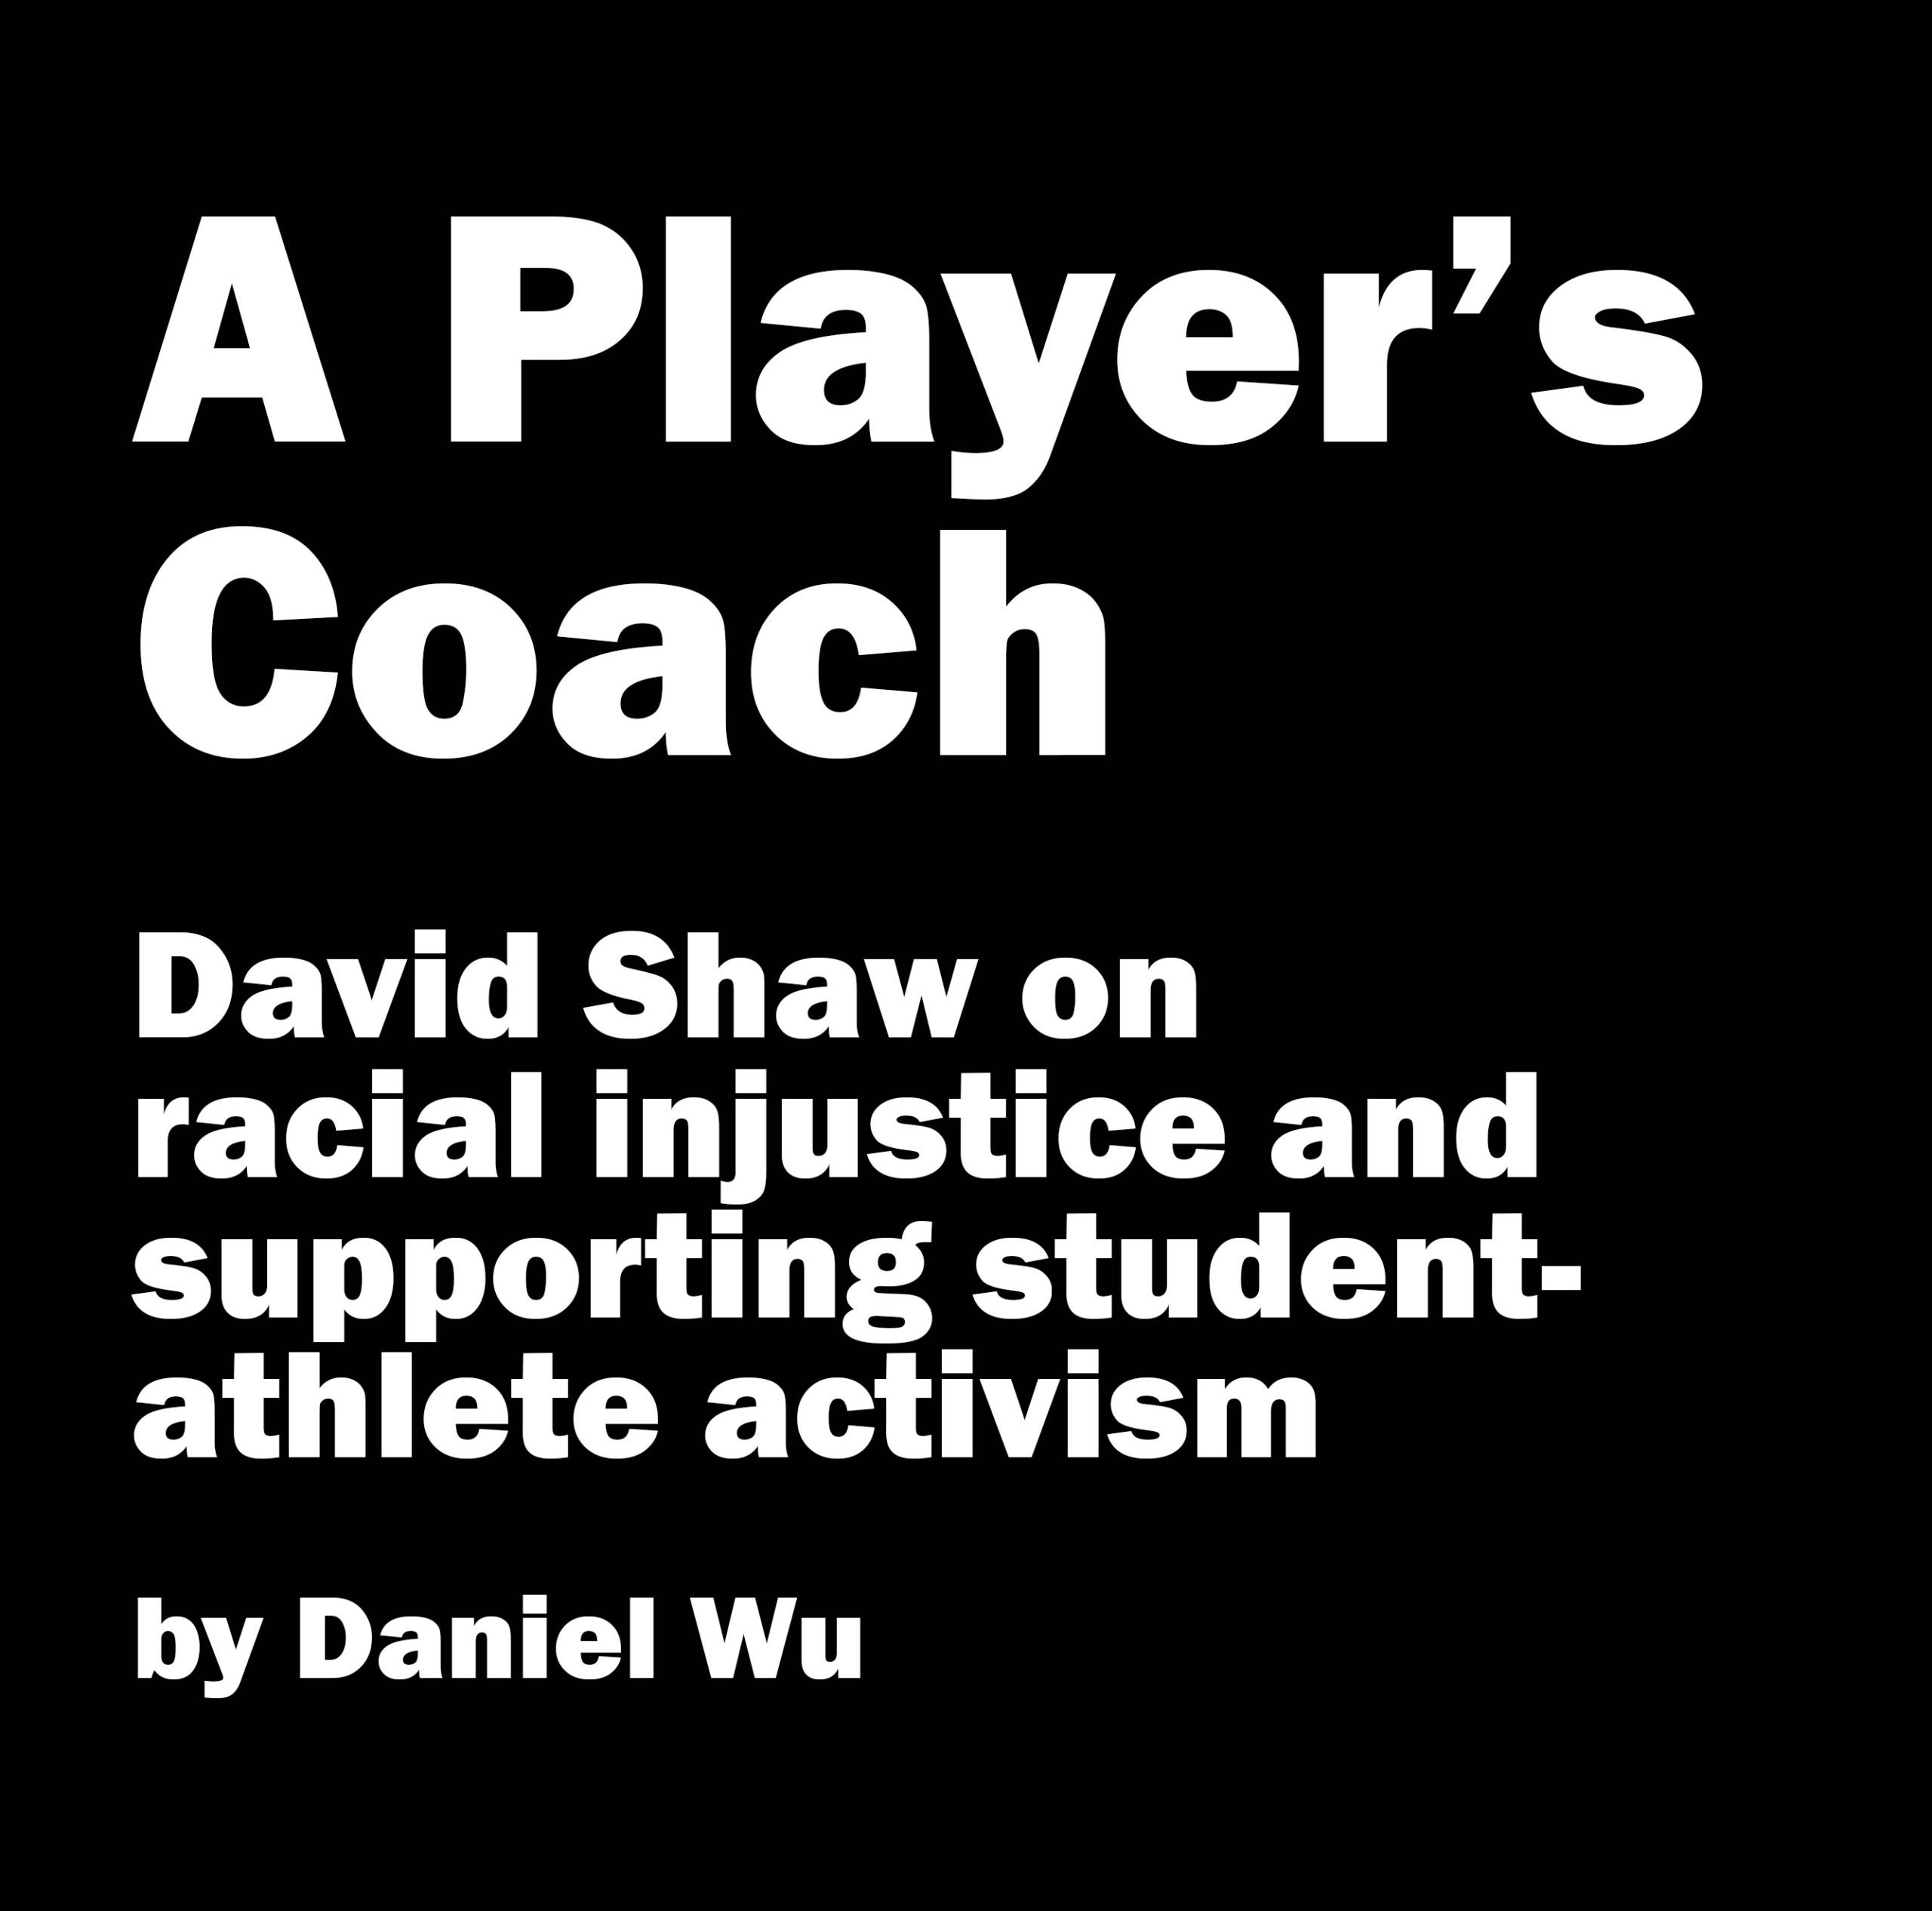 A Player's Coach: David Shaw on racial injustice and student-athlete activism